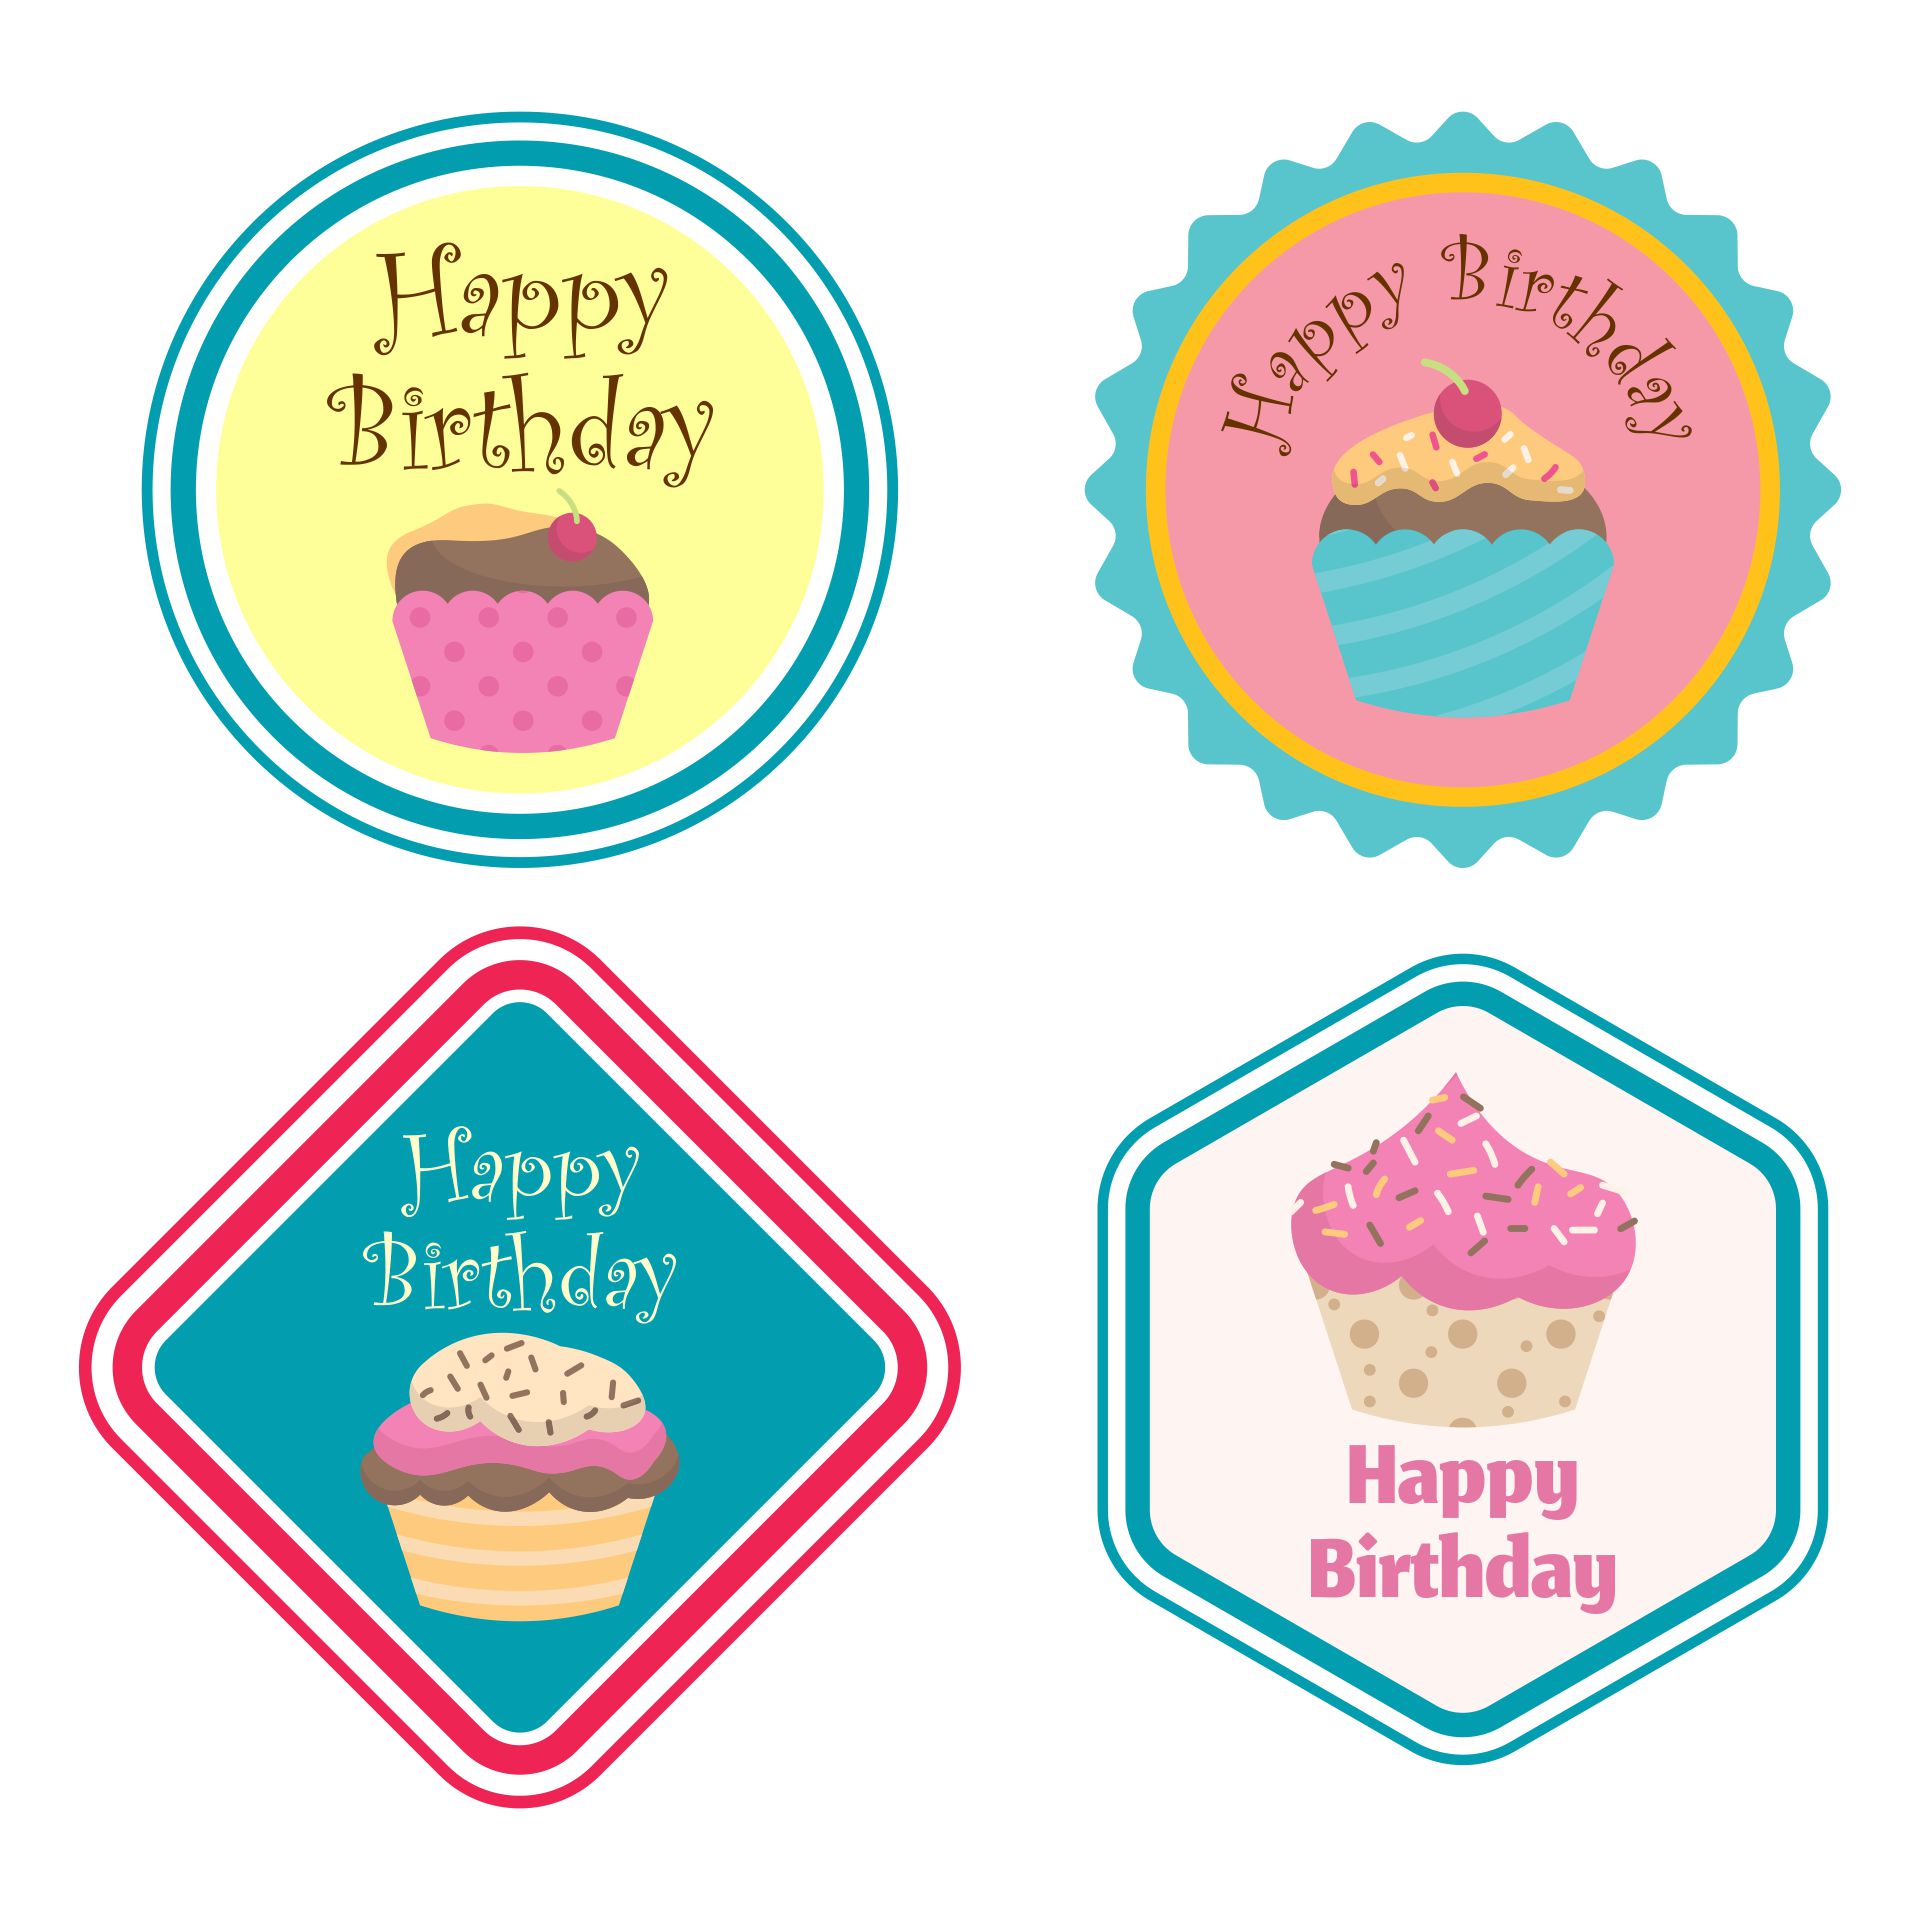 4-best-images-of-birthday-cupcake-for-classroom-calendar-printables